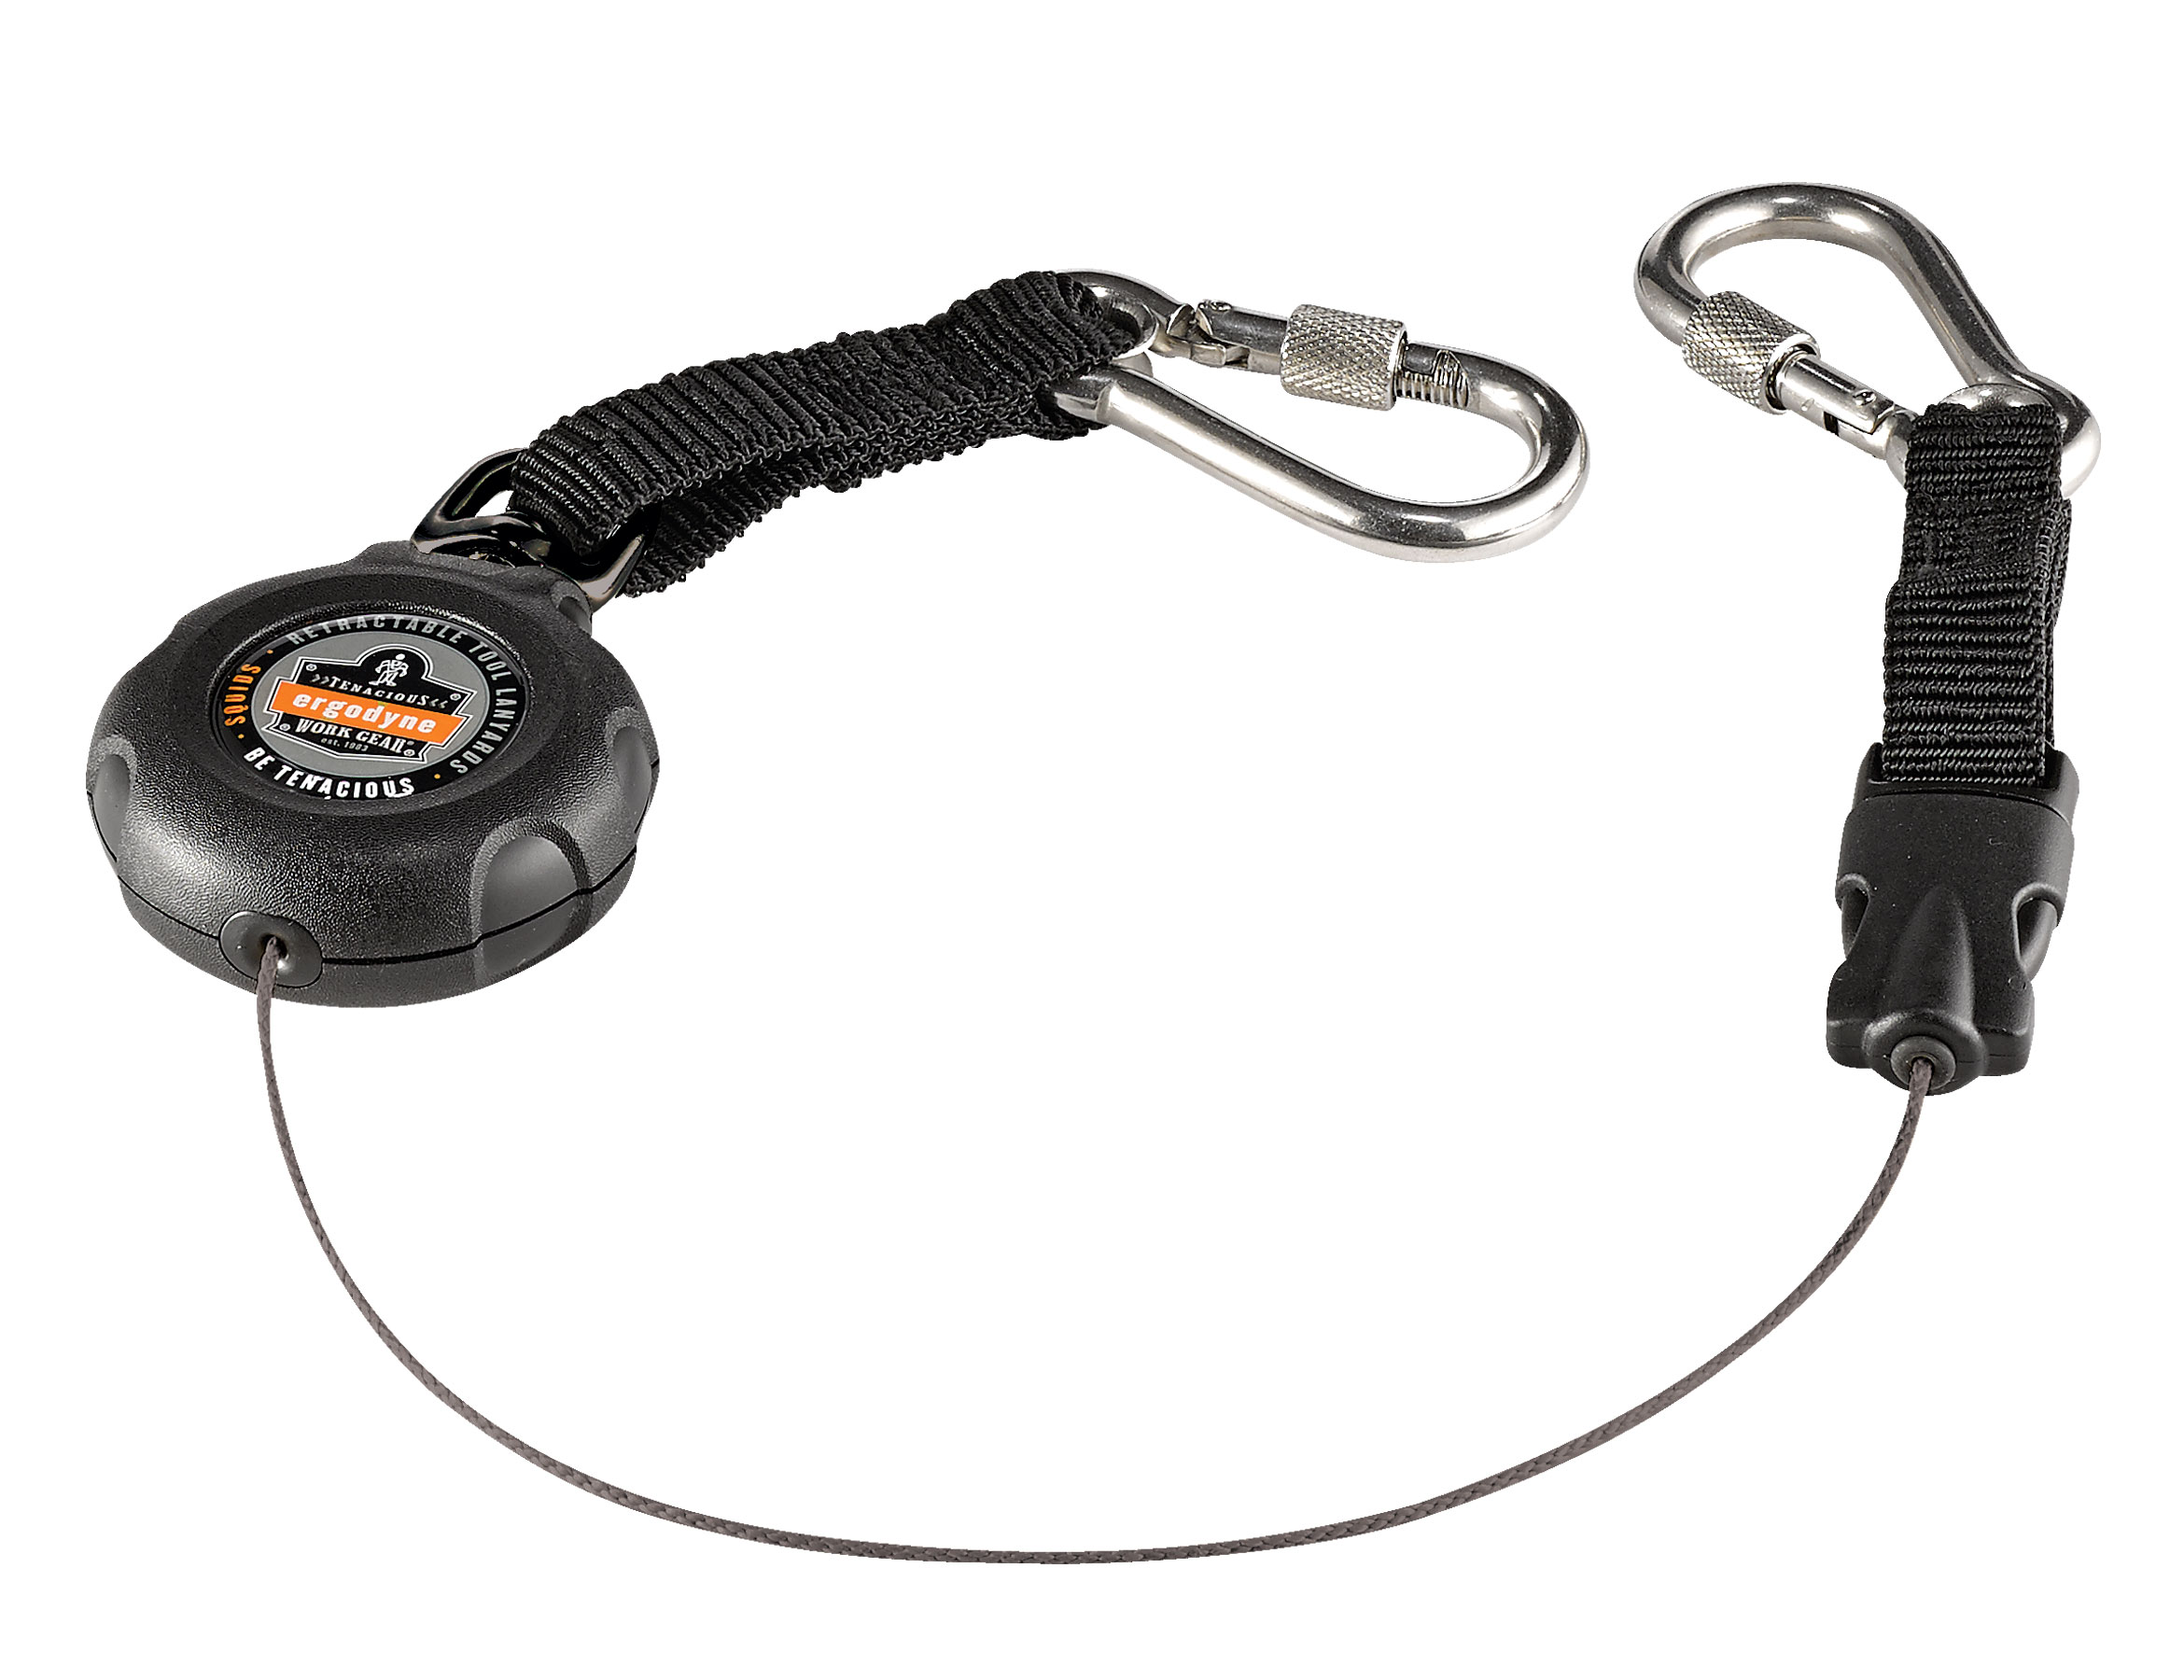 Ergodyne Squids 3000 Retractable Dual Stainless Steel Carabiner Tool Lanyard from Columbia Safety